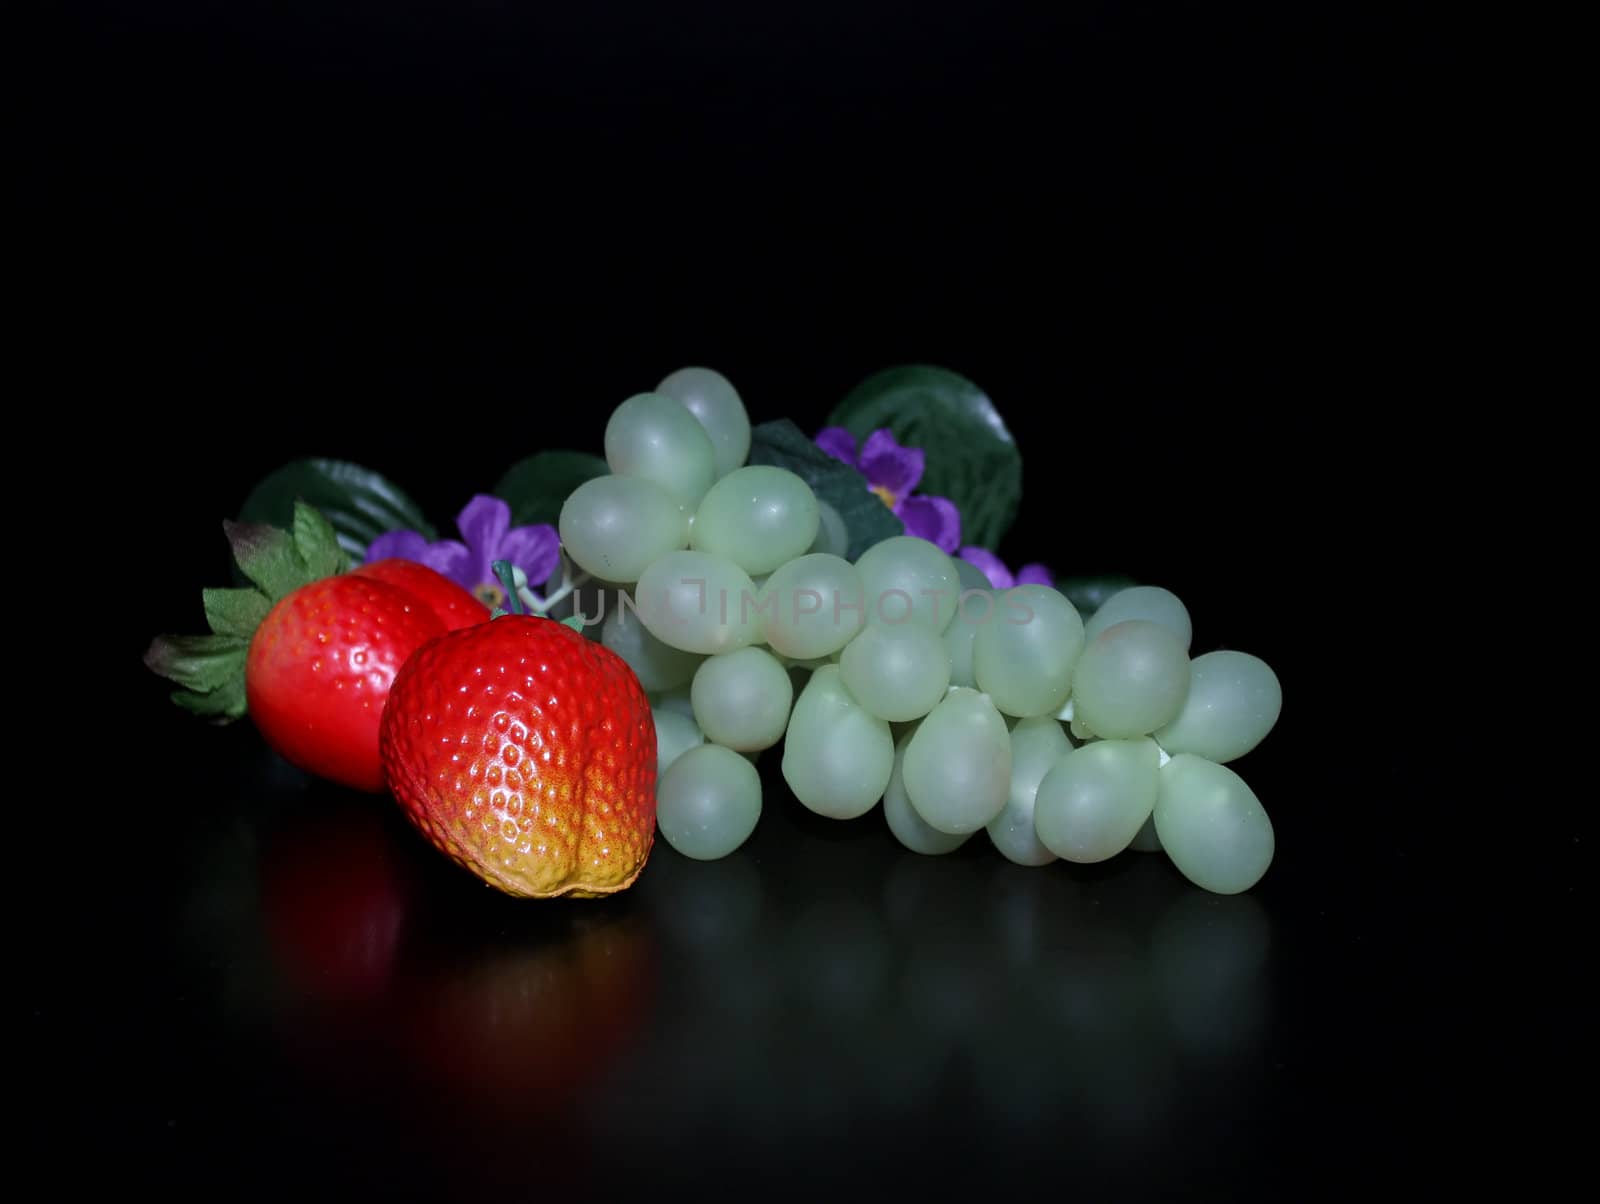 Bunch of grapes, strawberry and flowers over black